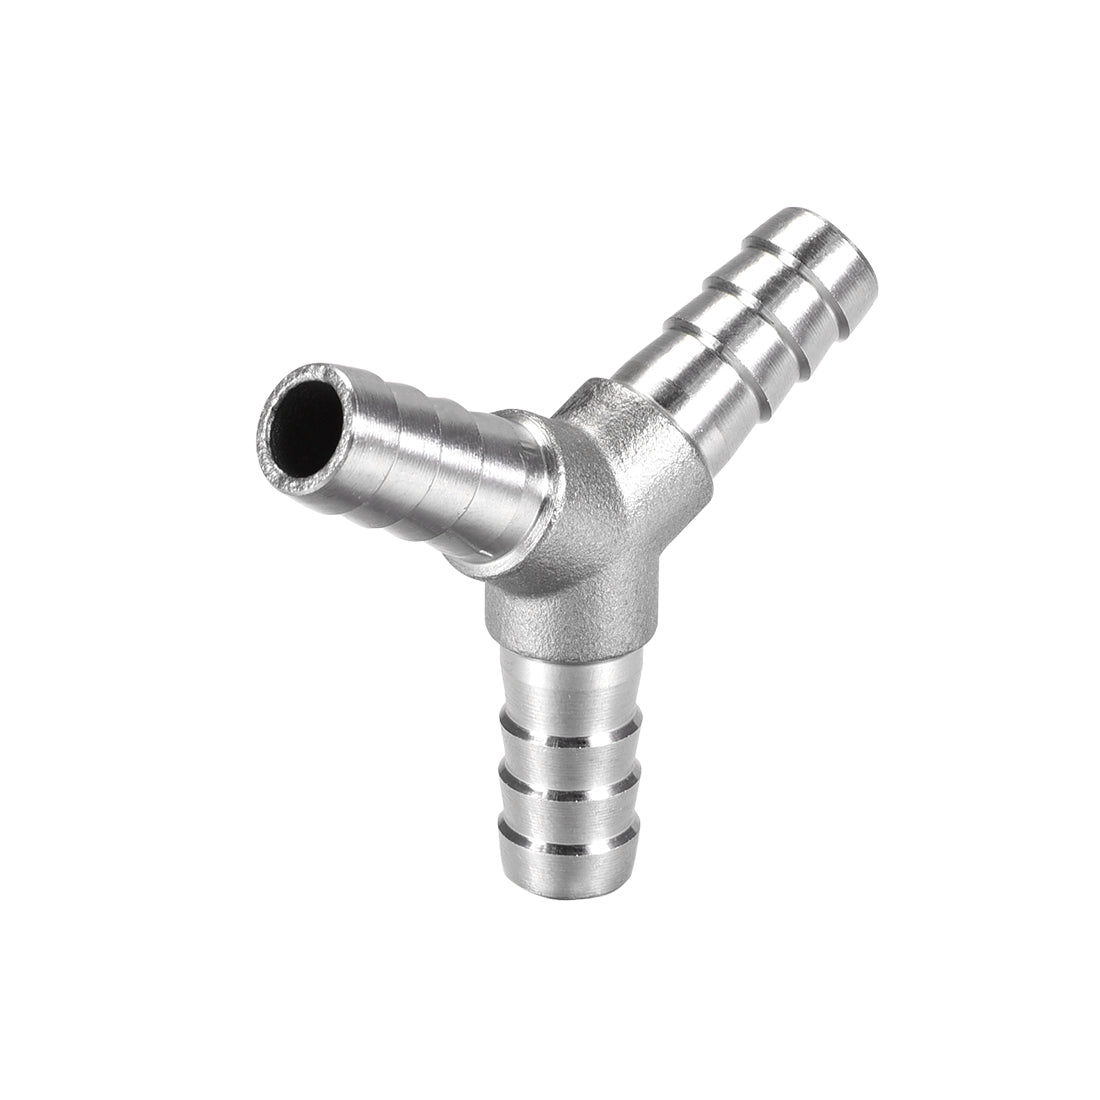 uxcell Uxcell 15/32-Inch (12mm) Hose ID Barb Fitting Stainless Steel 3 Way Y Shaped Union Home Brew Fitting